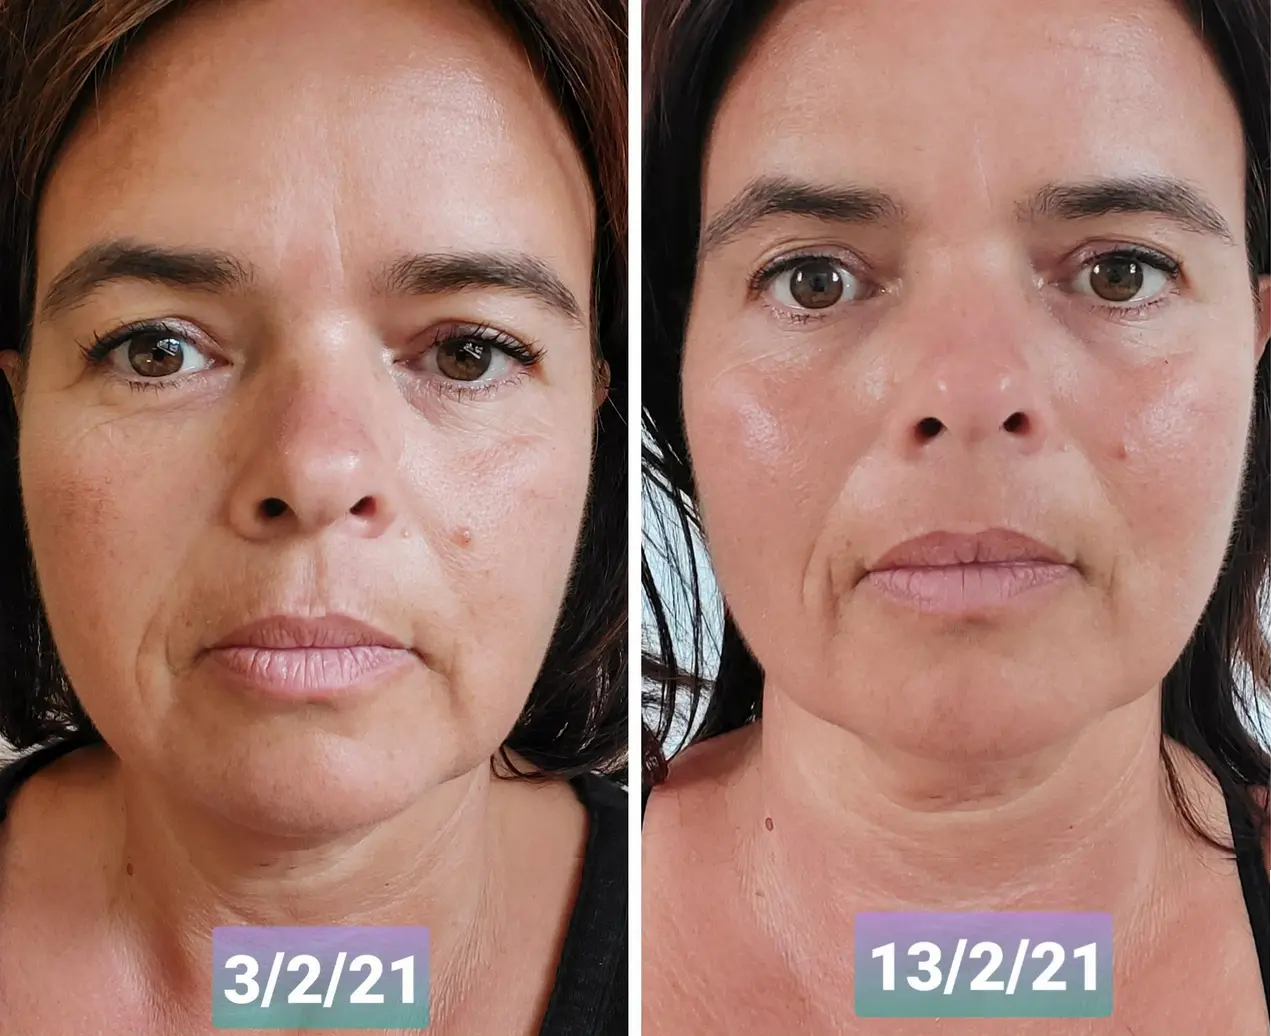 happy face yoga before and after - Does happy face yoga work